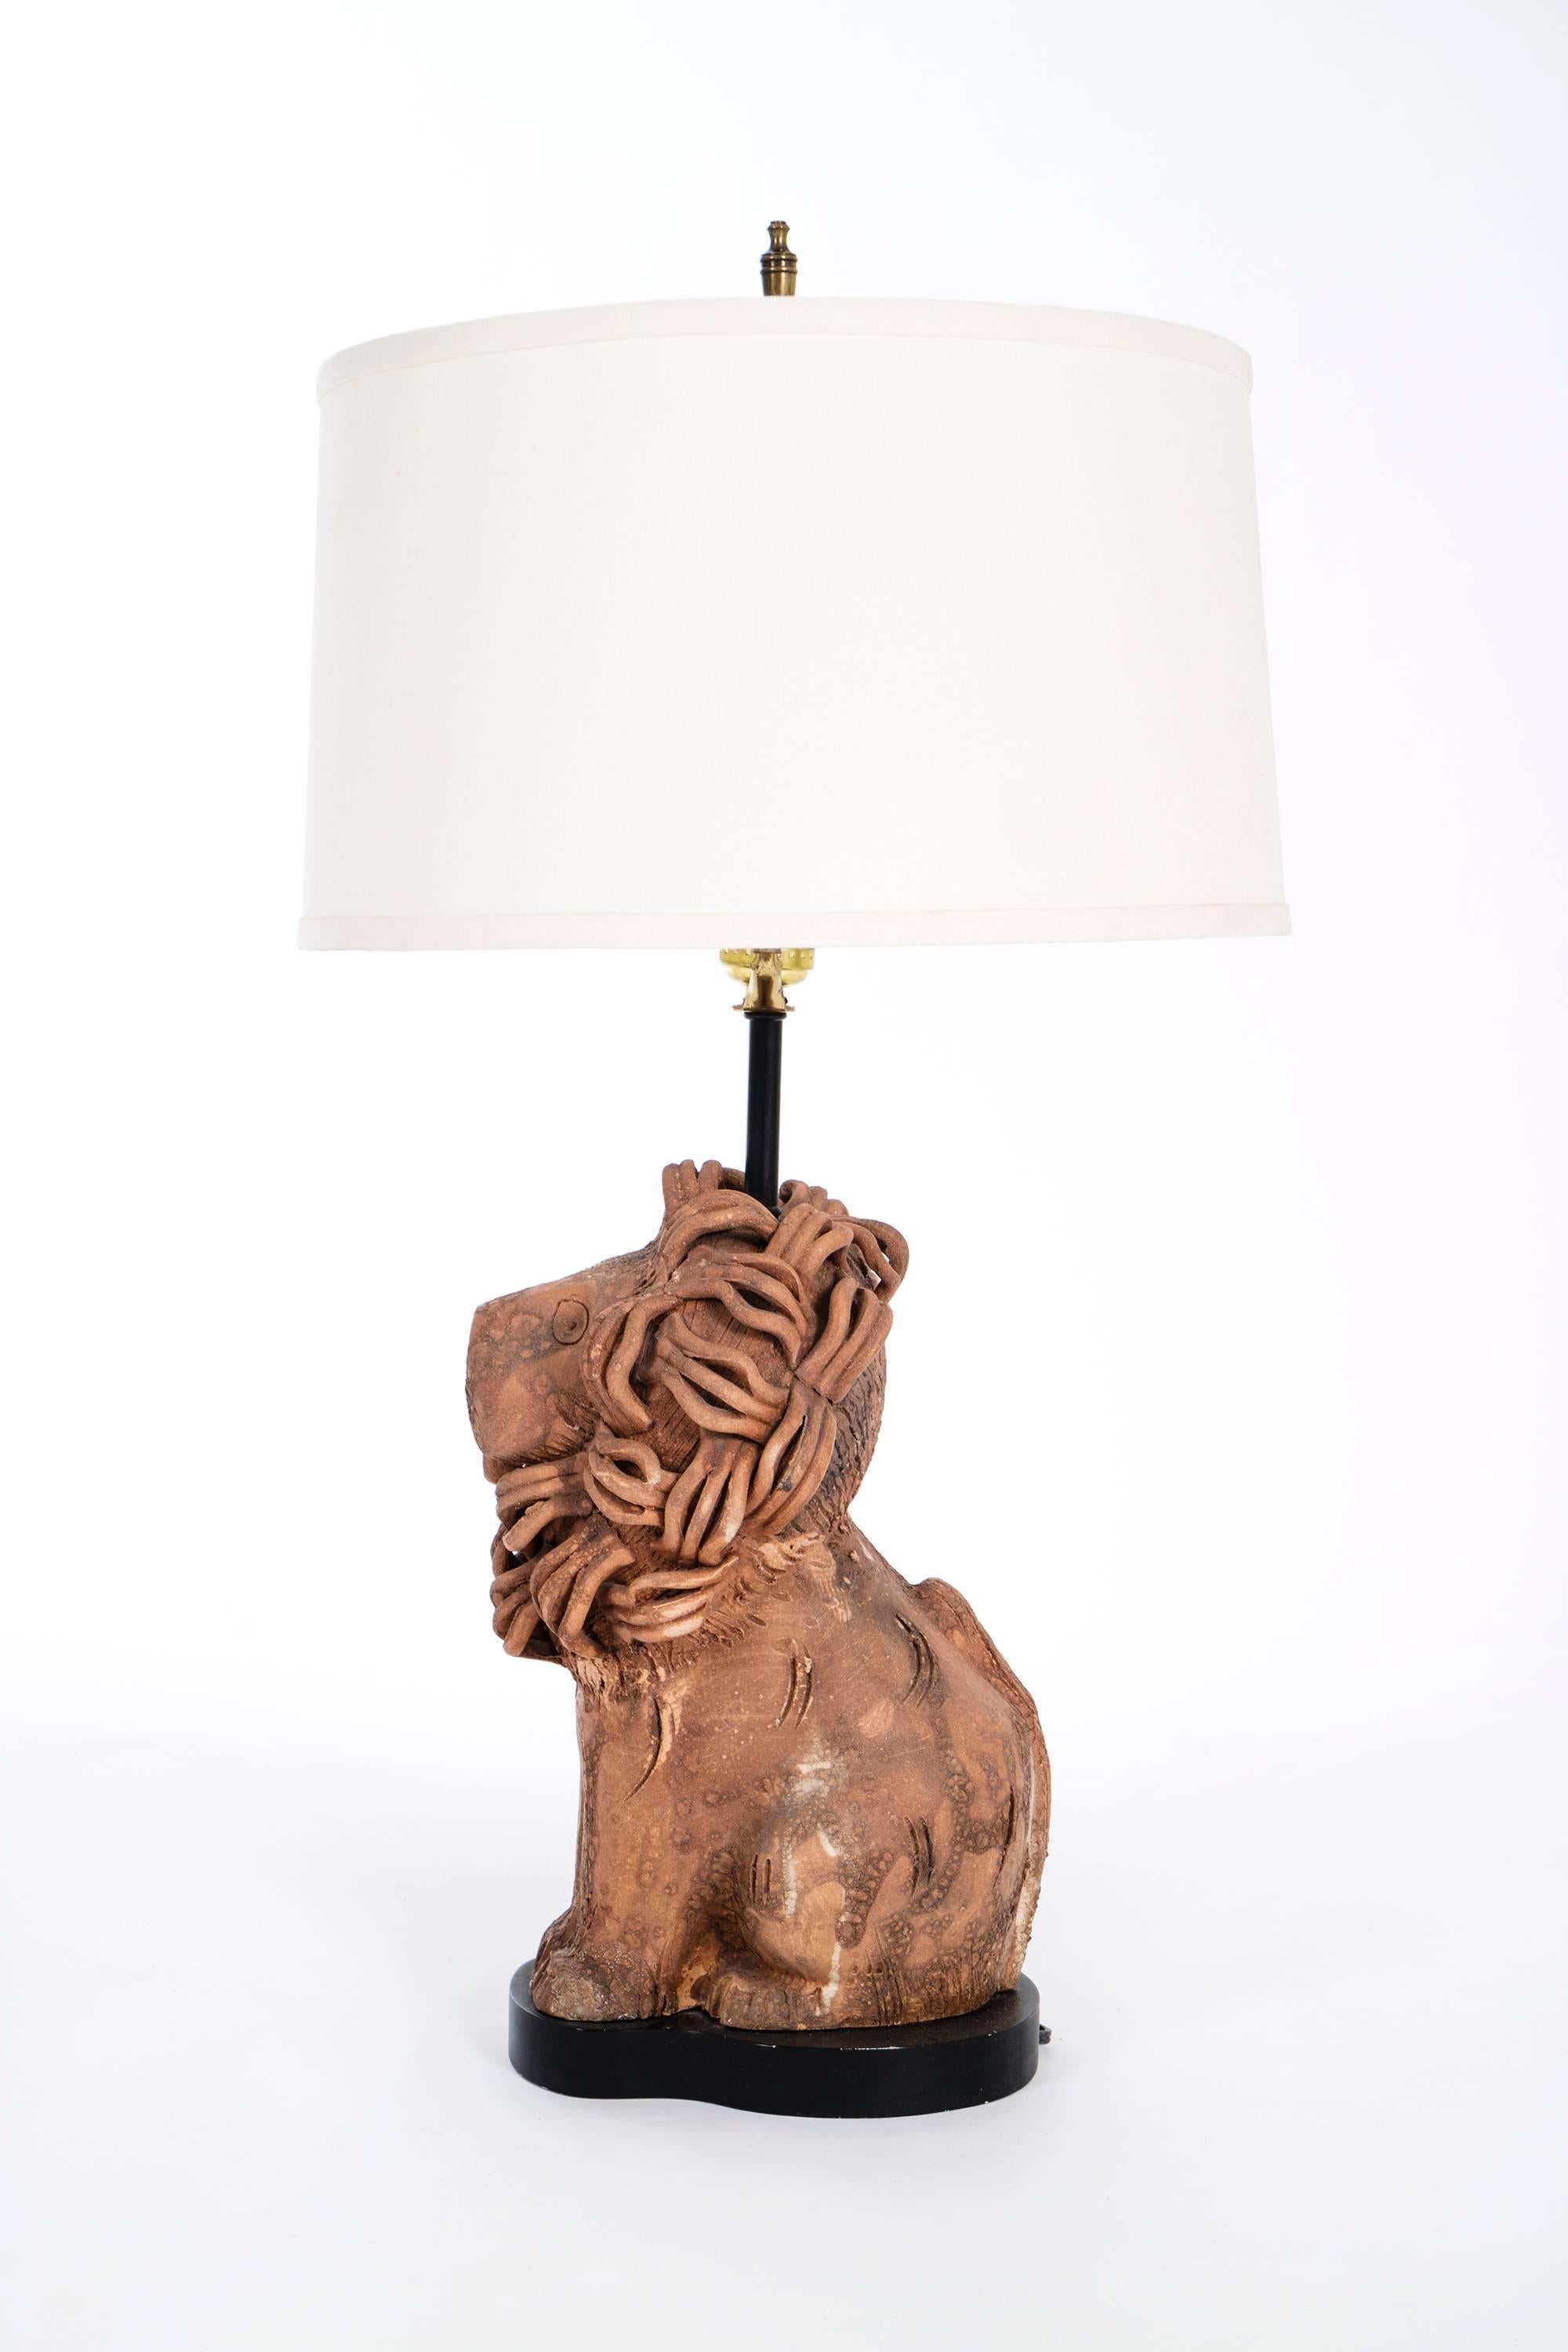 Aldo Londi for Bitossi, Decorative ceramic lamp depicting a lion.

This item is currently on view in our NYC Greenwich Street Location.